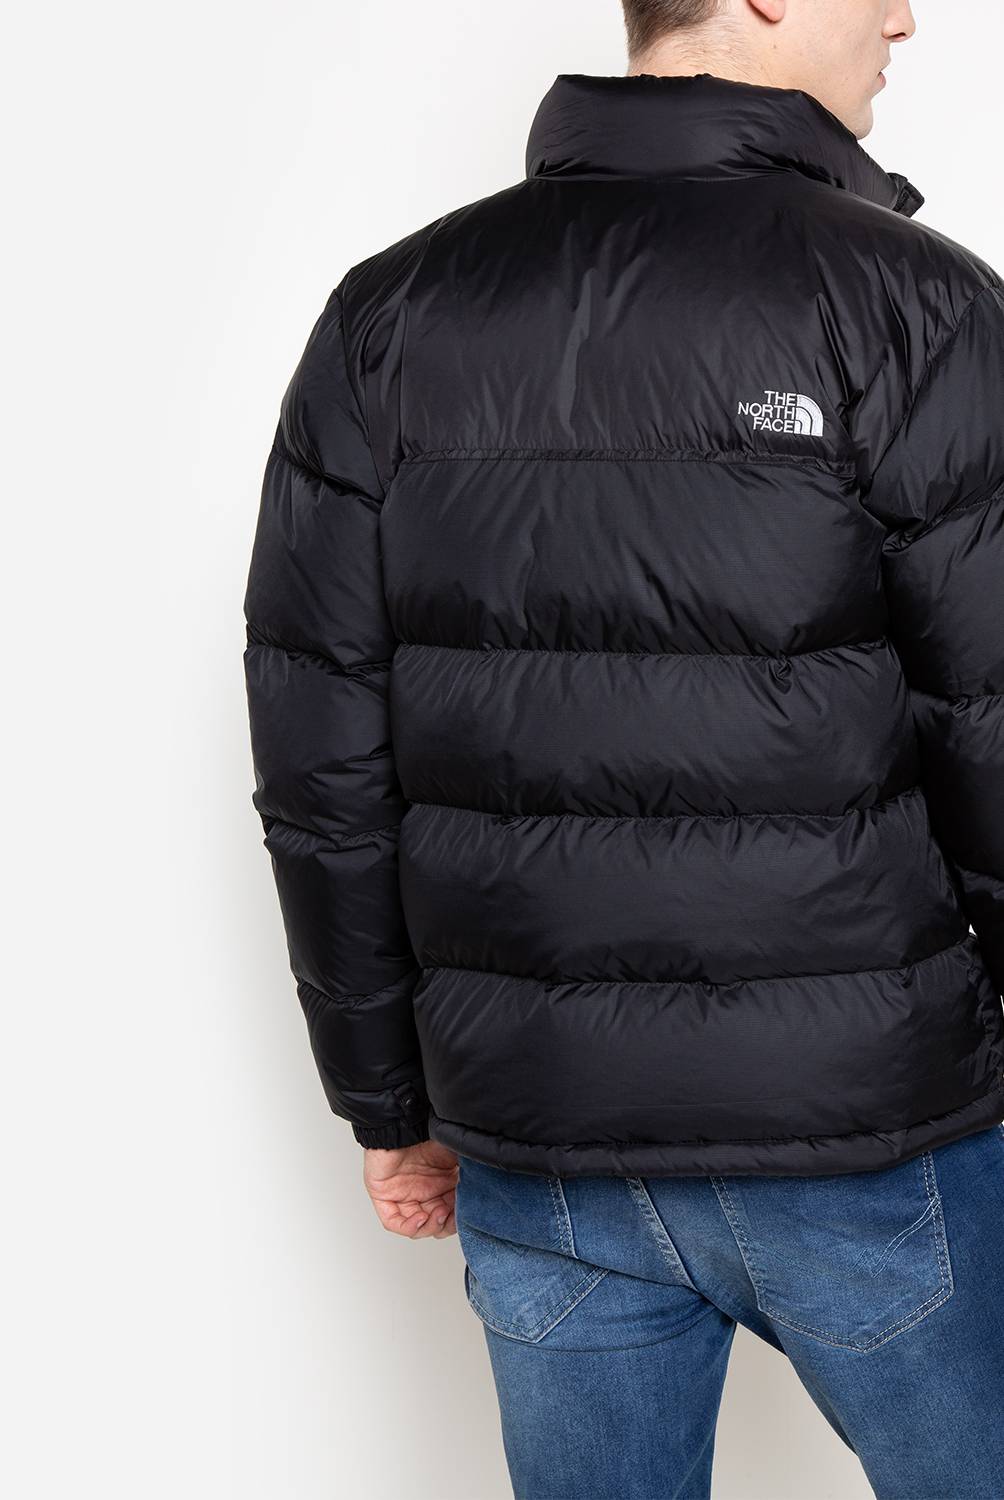 THE NORTH FACE - North face Parka hombre